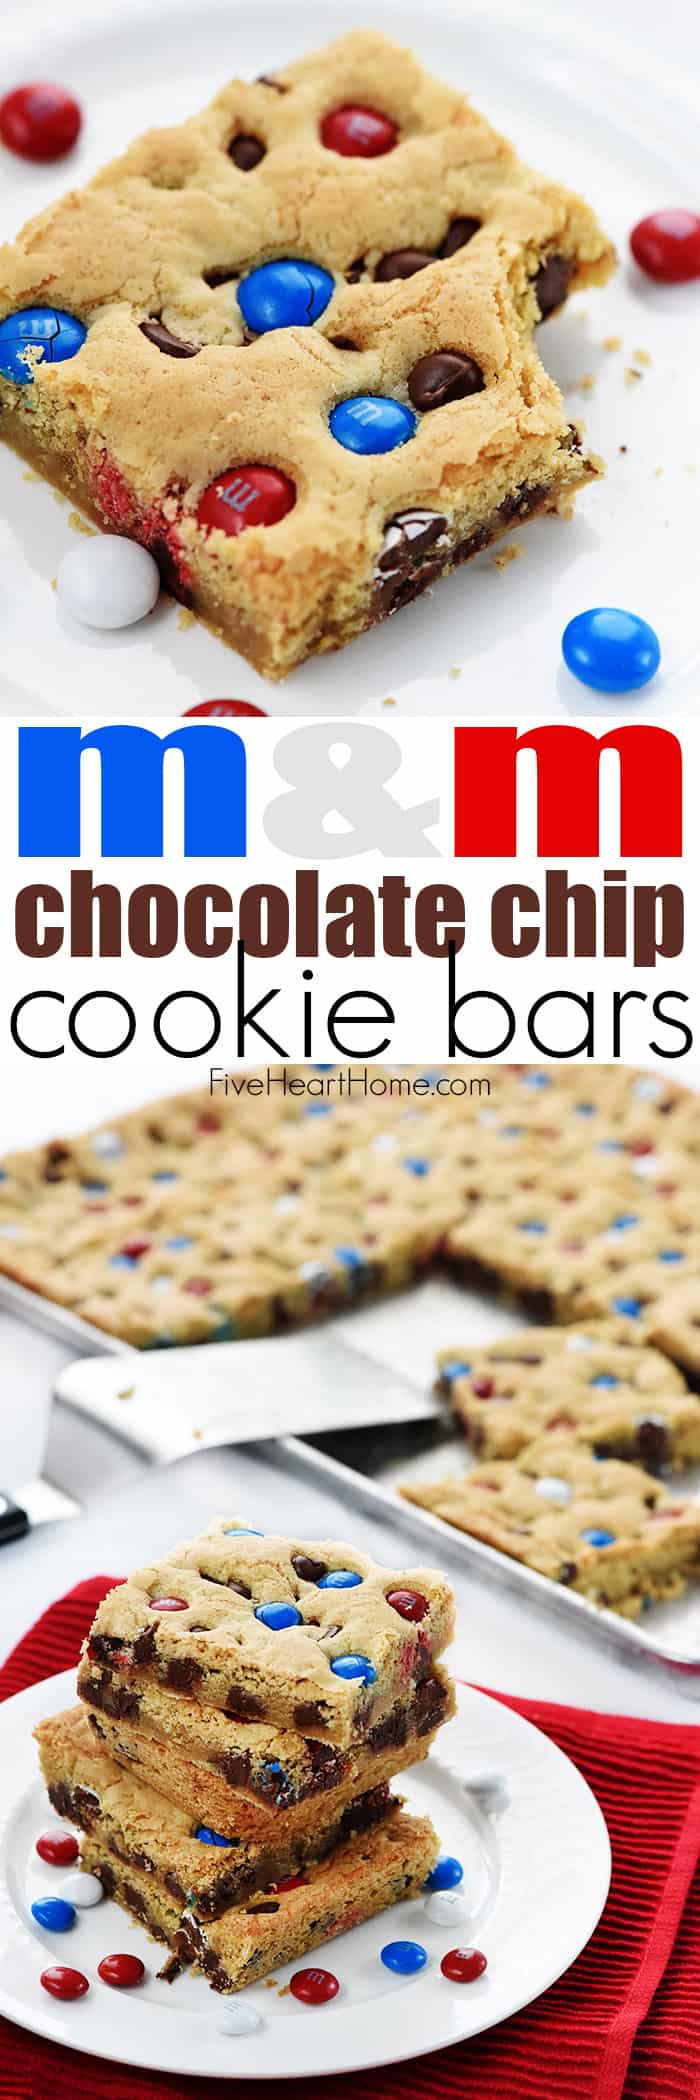 M&M Chocolate Chip Cookies Bars ~ these thick, chewy, big-batch treats are simple to make, fun to share, easy to customize with different colored M&Ms, and always a huge hit! | FiveHeartHome.com via @fivehearthome